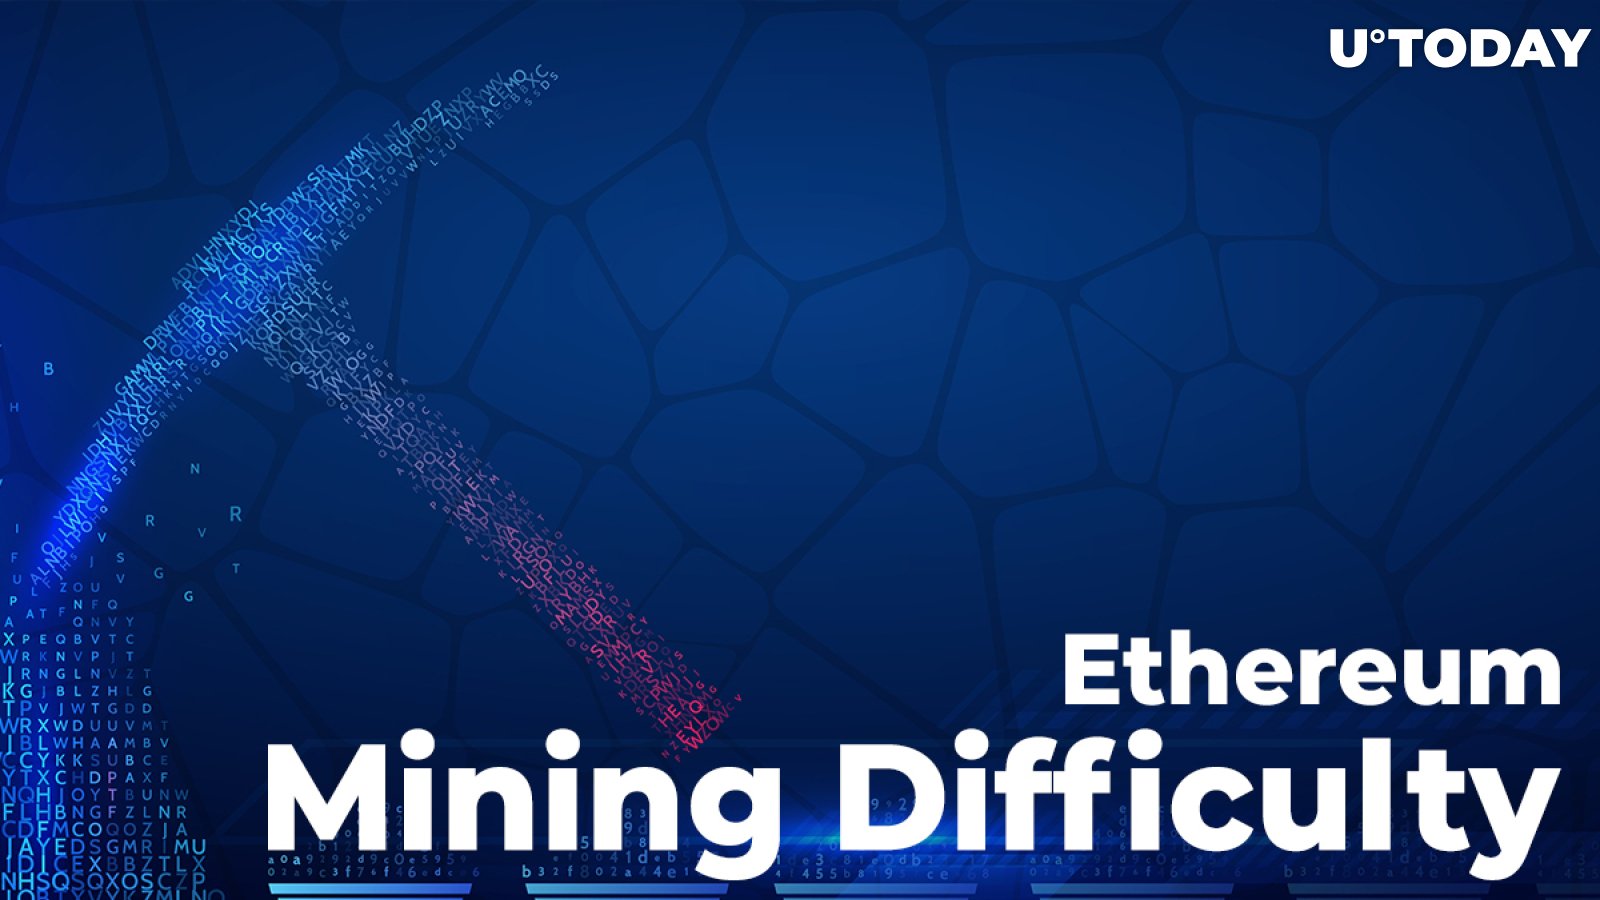  Ethereum Mining Difficulty Hit New High with 200,000 ETH Burned: Here's How Market Reacts